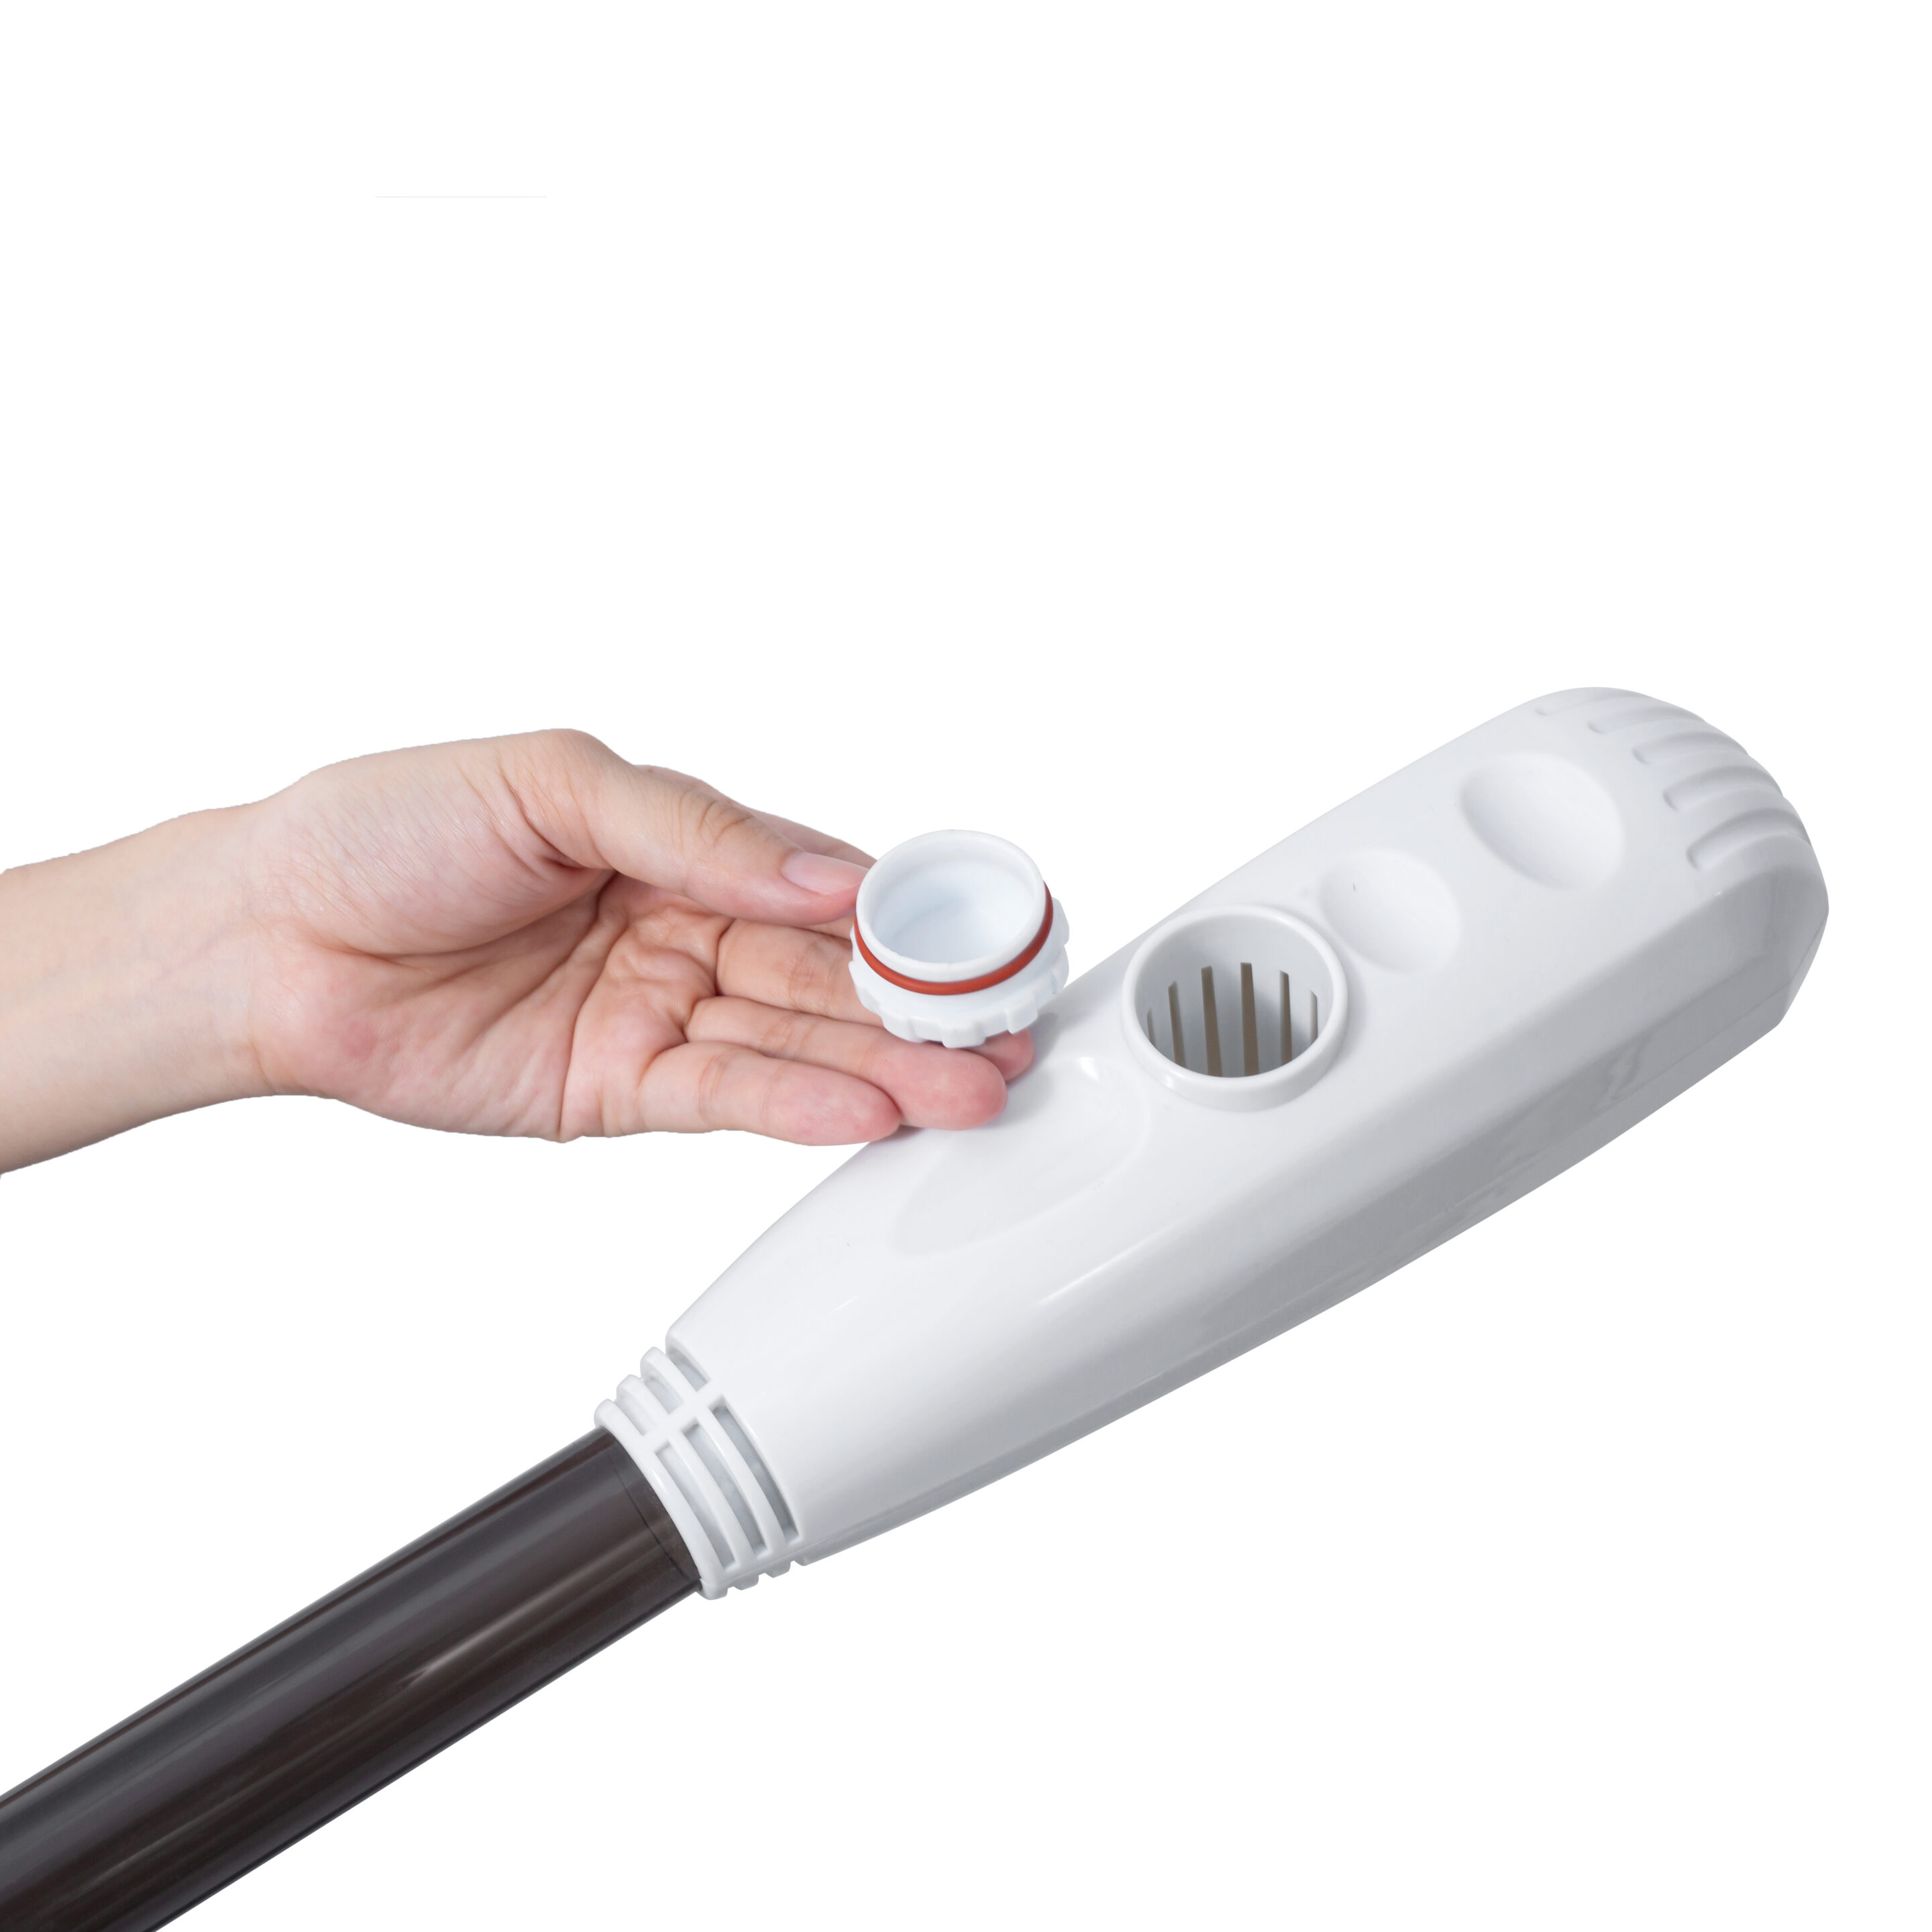 Upgraded Double-Tube Cold & Heat Spray Facial Steamer